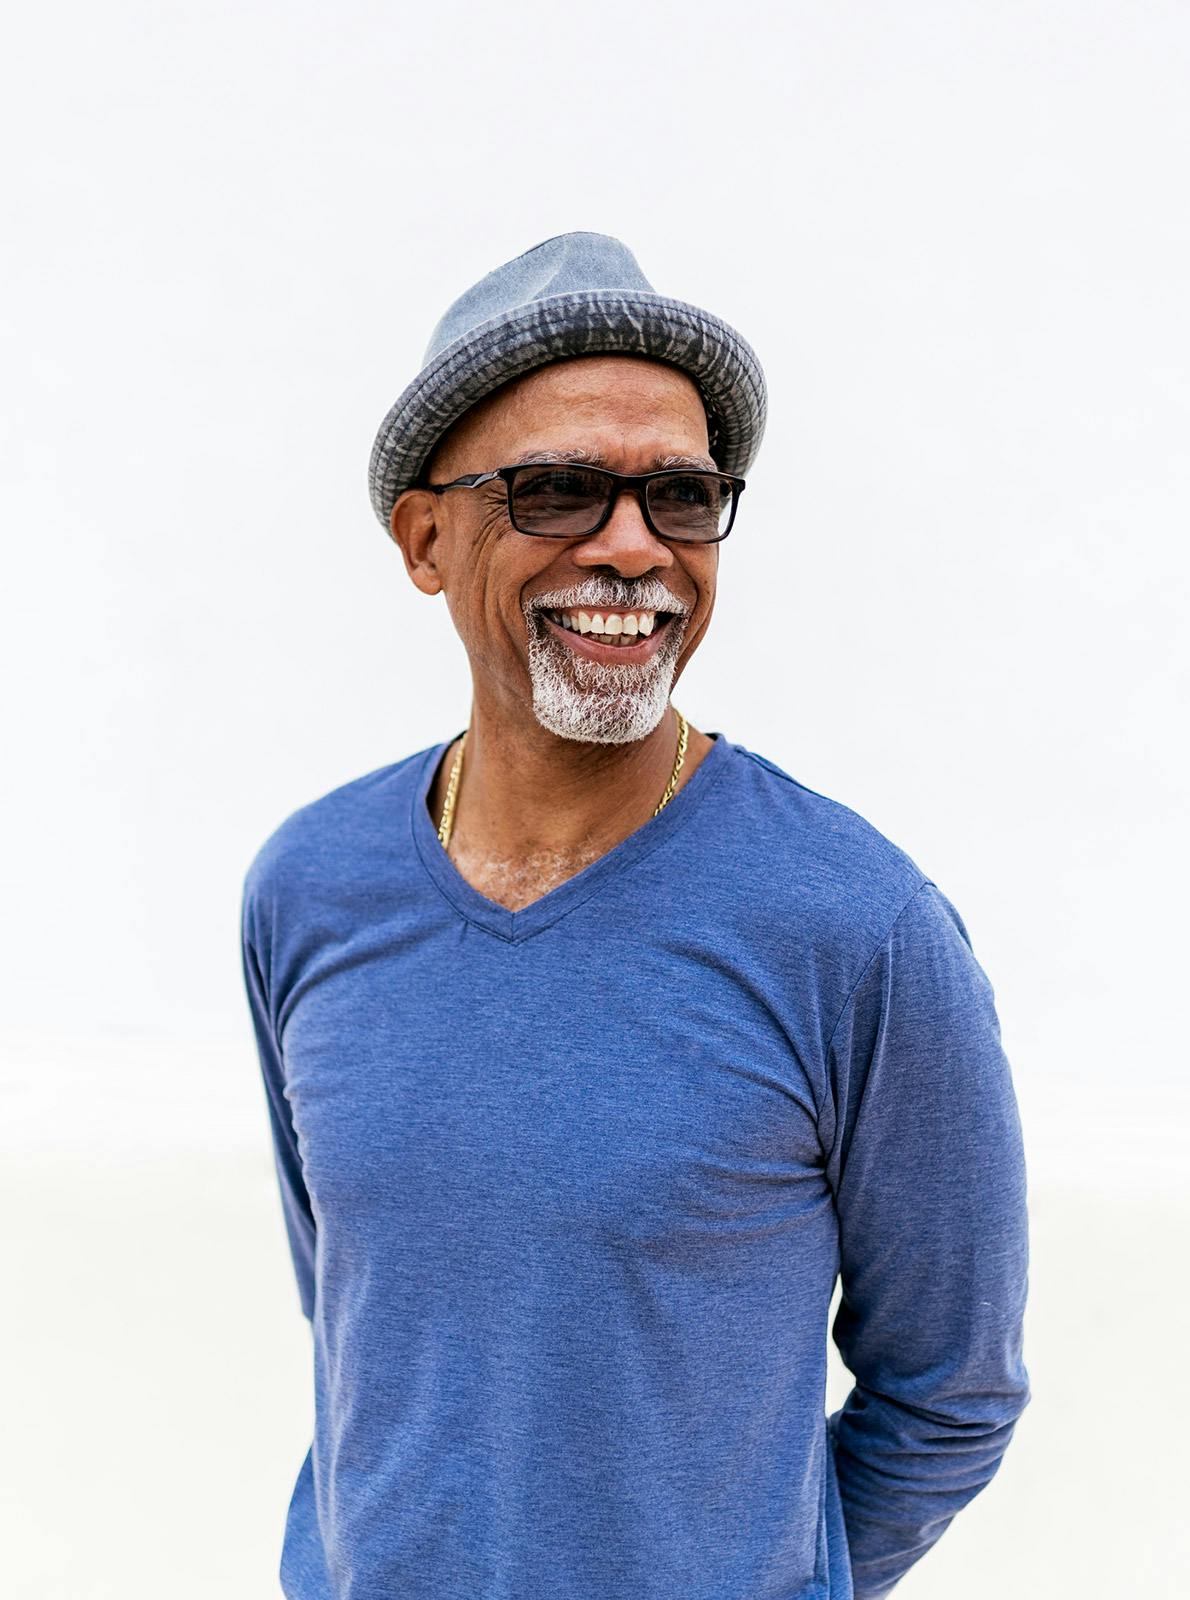 An older Black man standing in front of a white wall. He is smiling. He is wearing glasses and a hat.